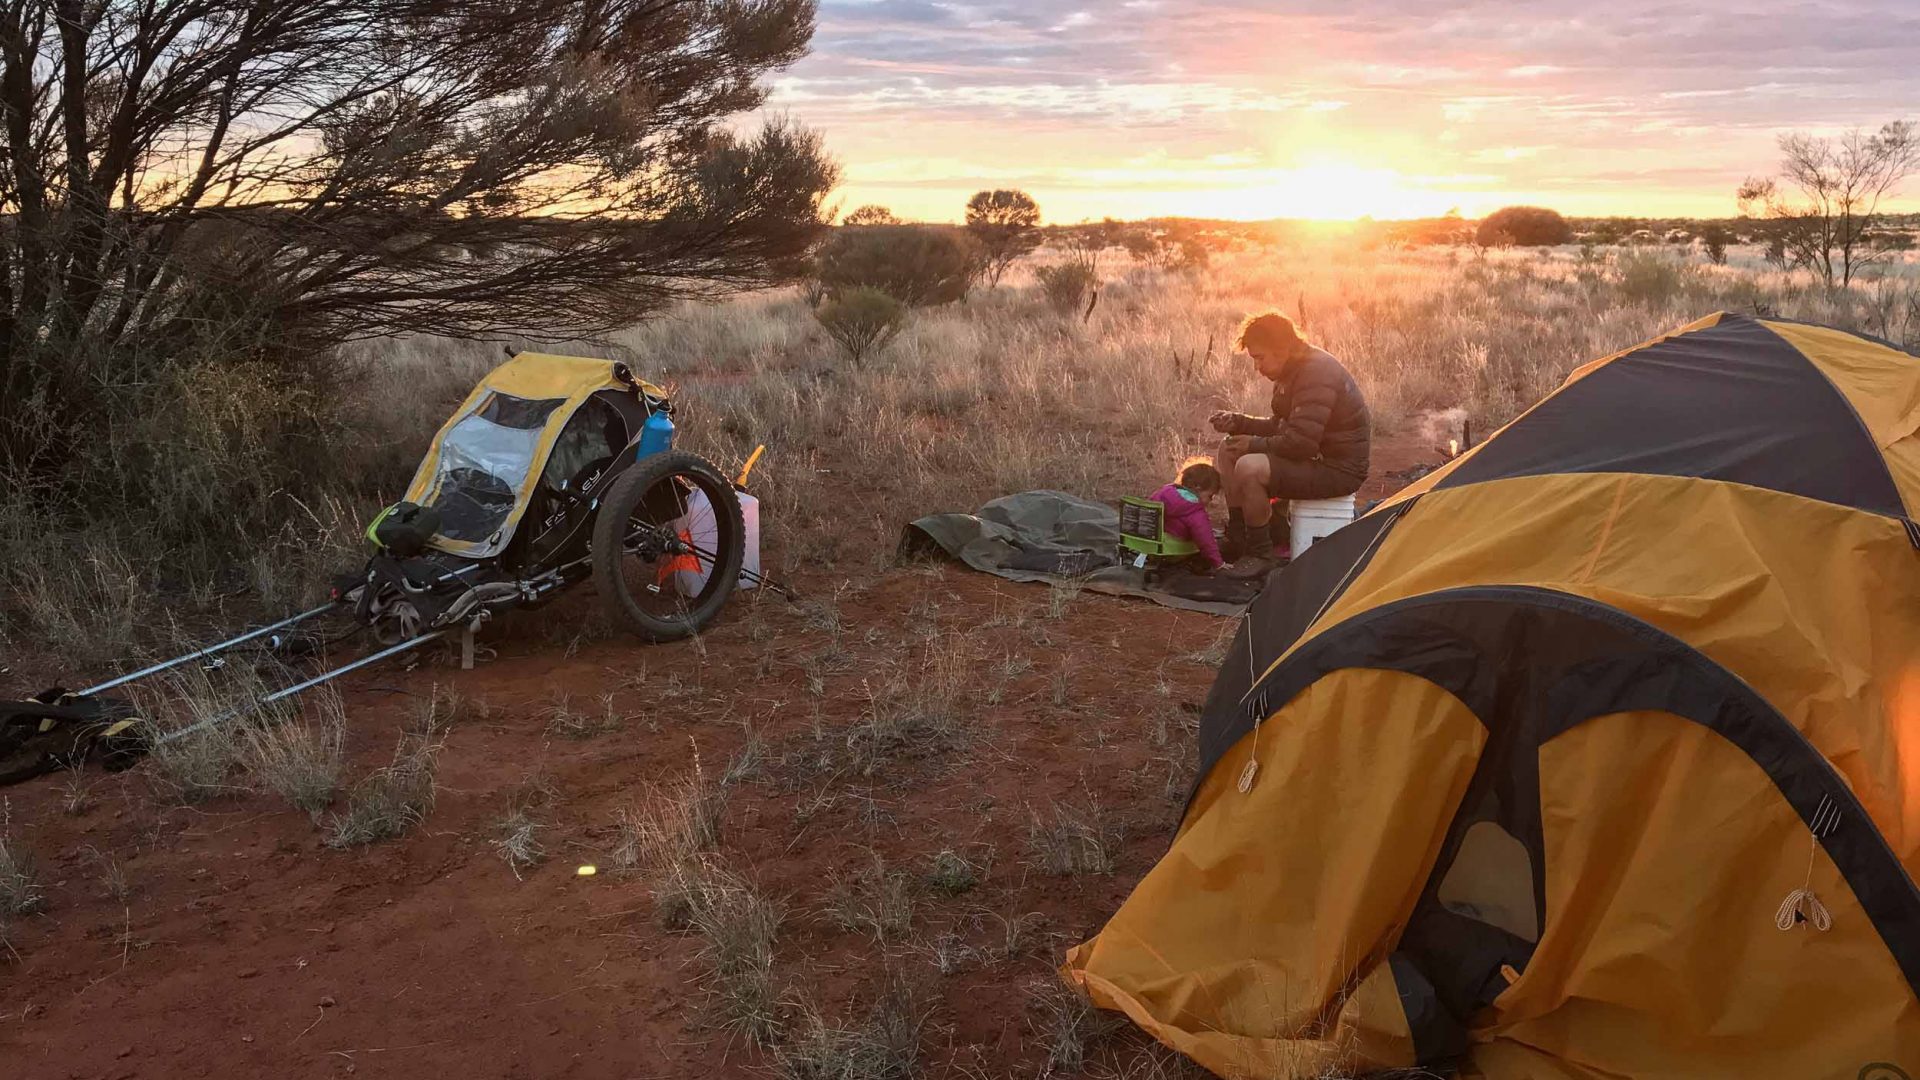 The Jonesys set up camp for the night in the Australian outback.